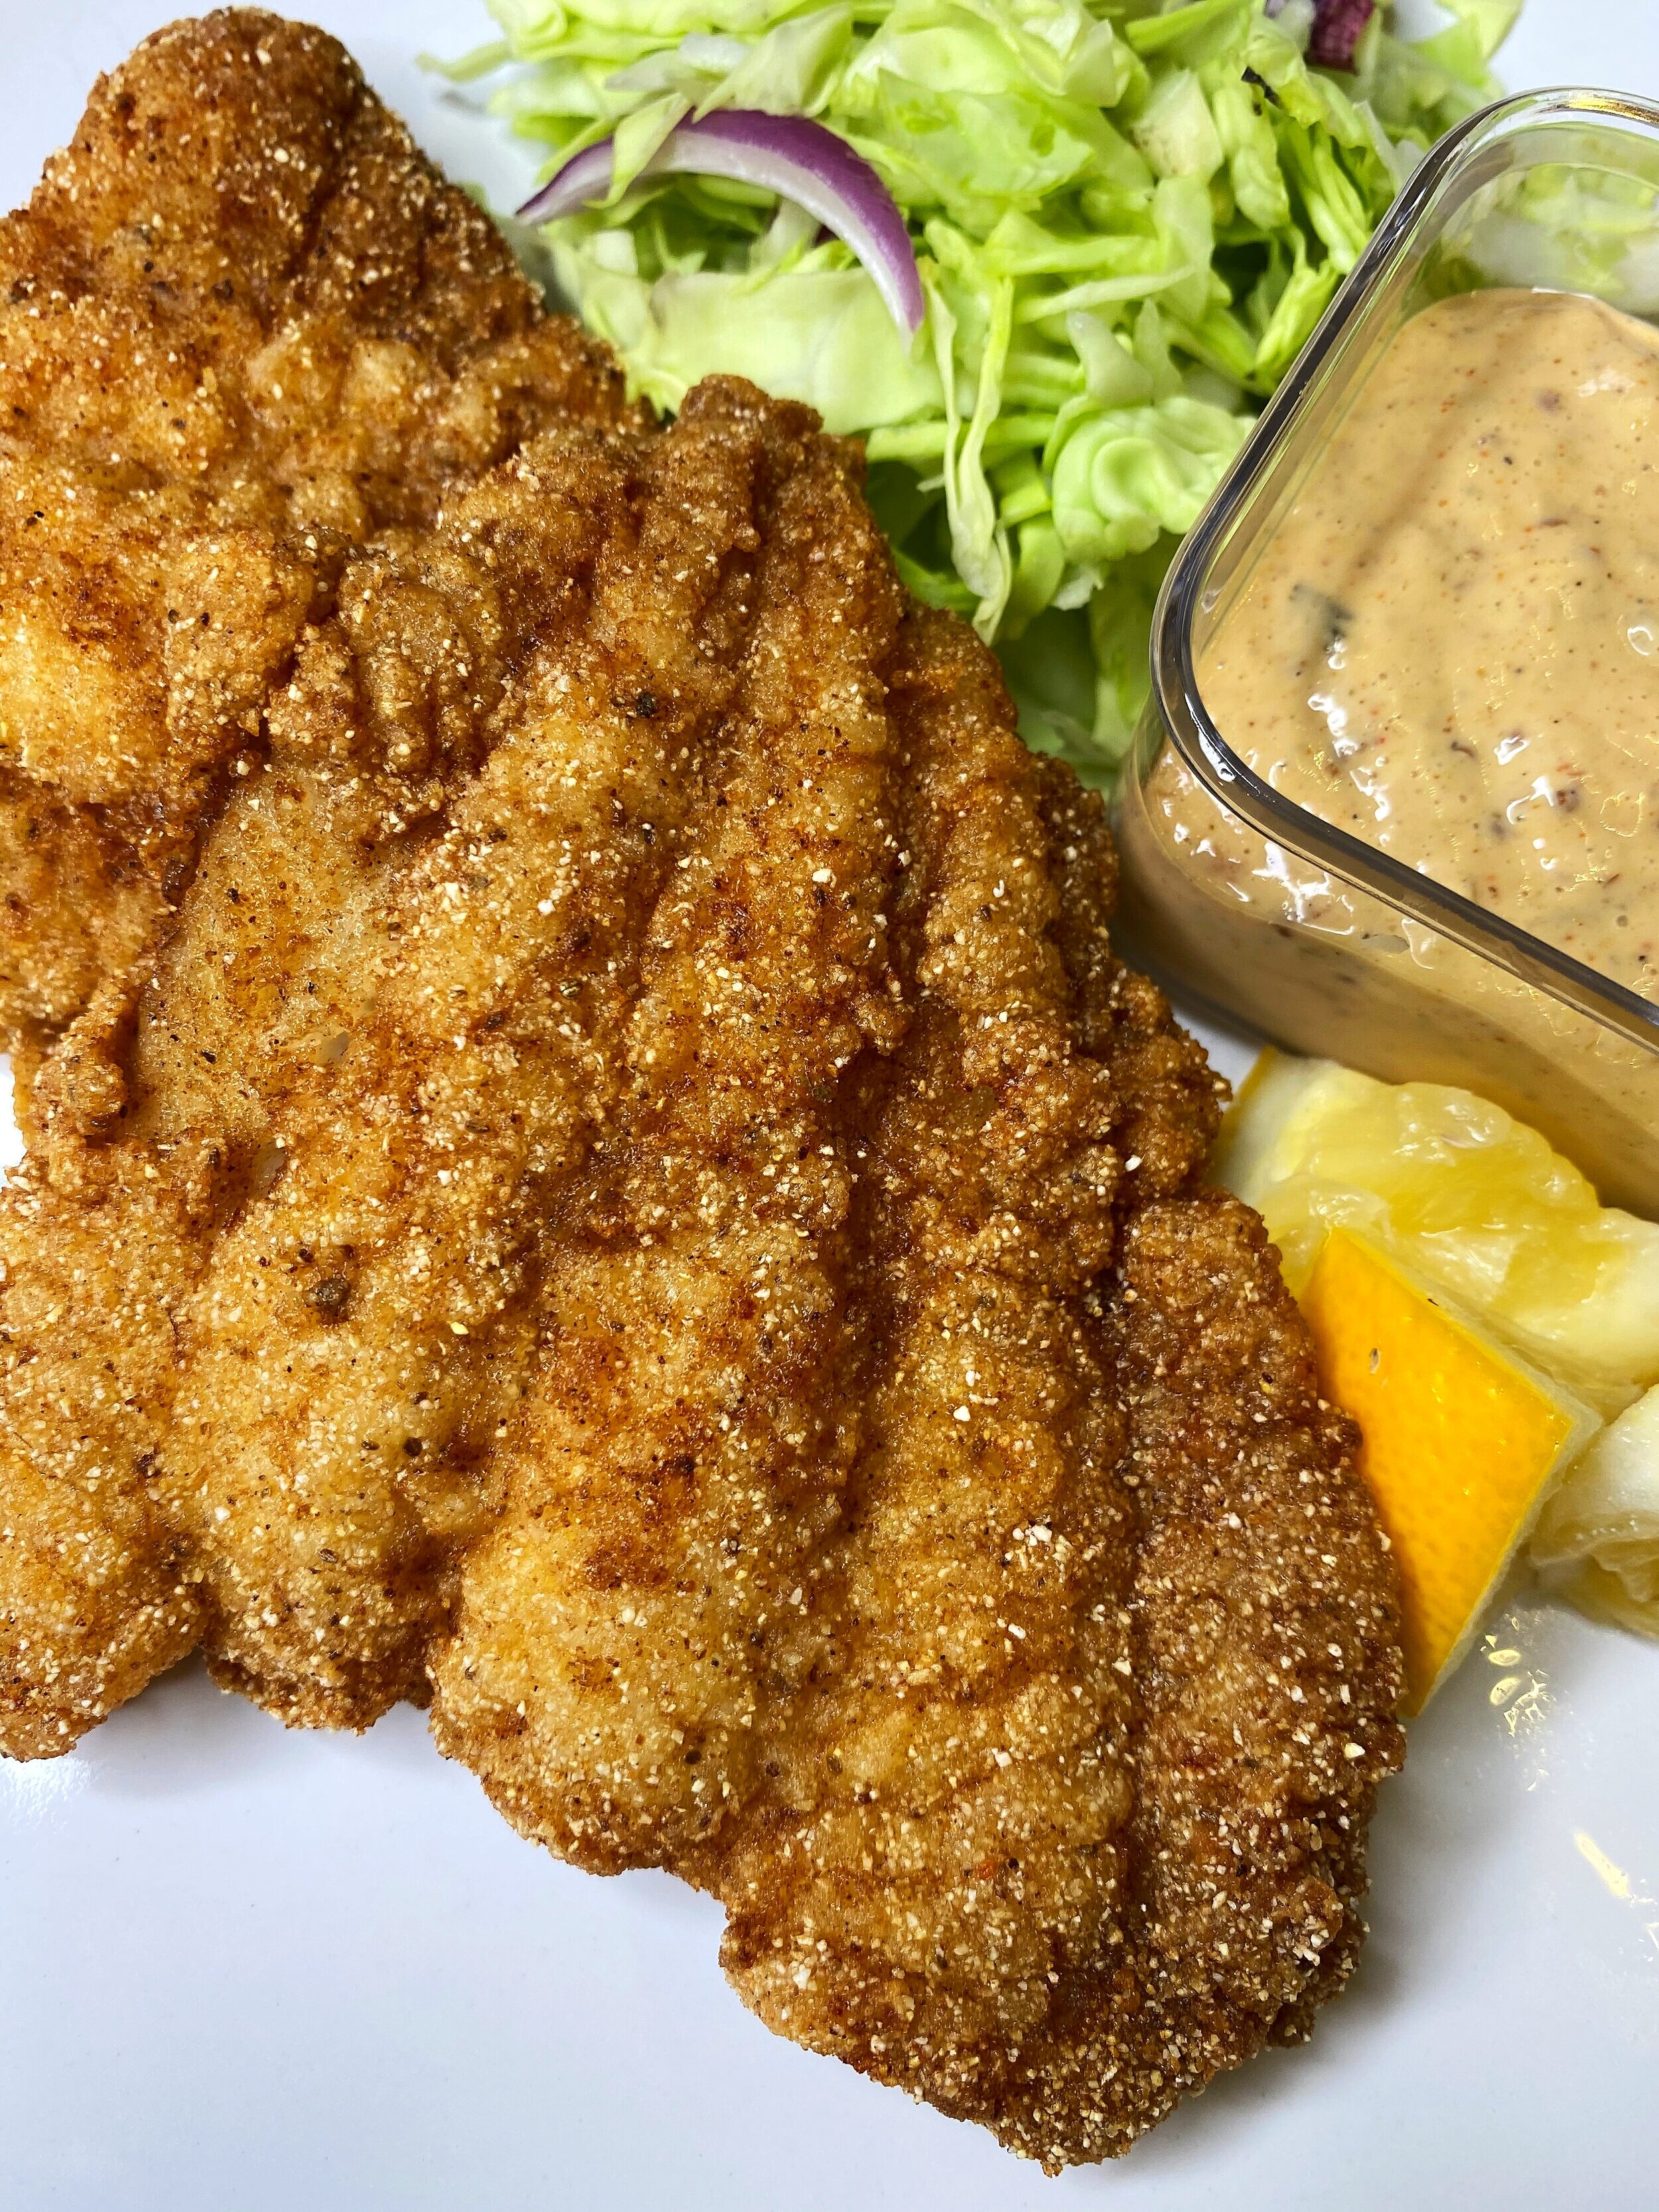 Ganny�s Fried Catfish - Want to really impress your friends? This is the recipe to do it. 